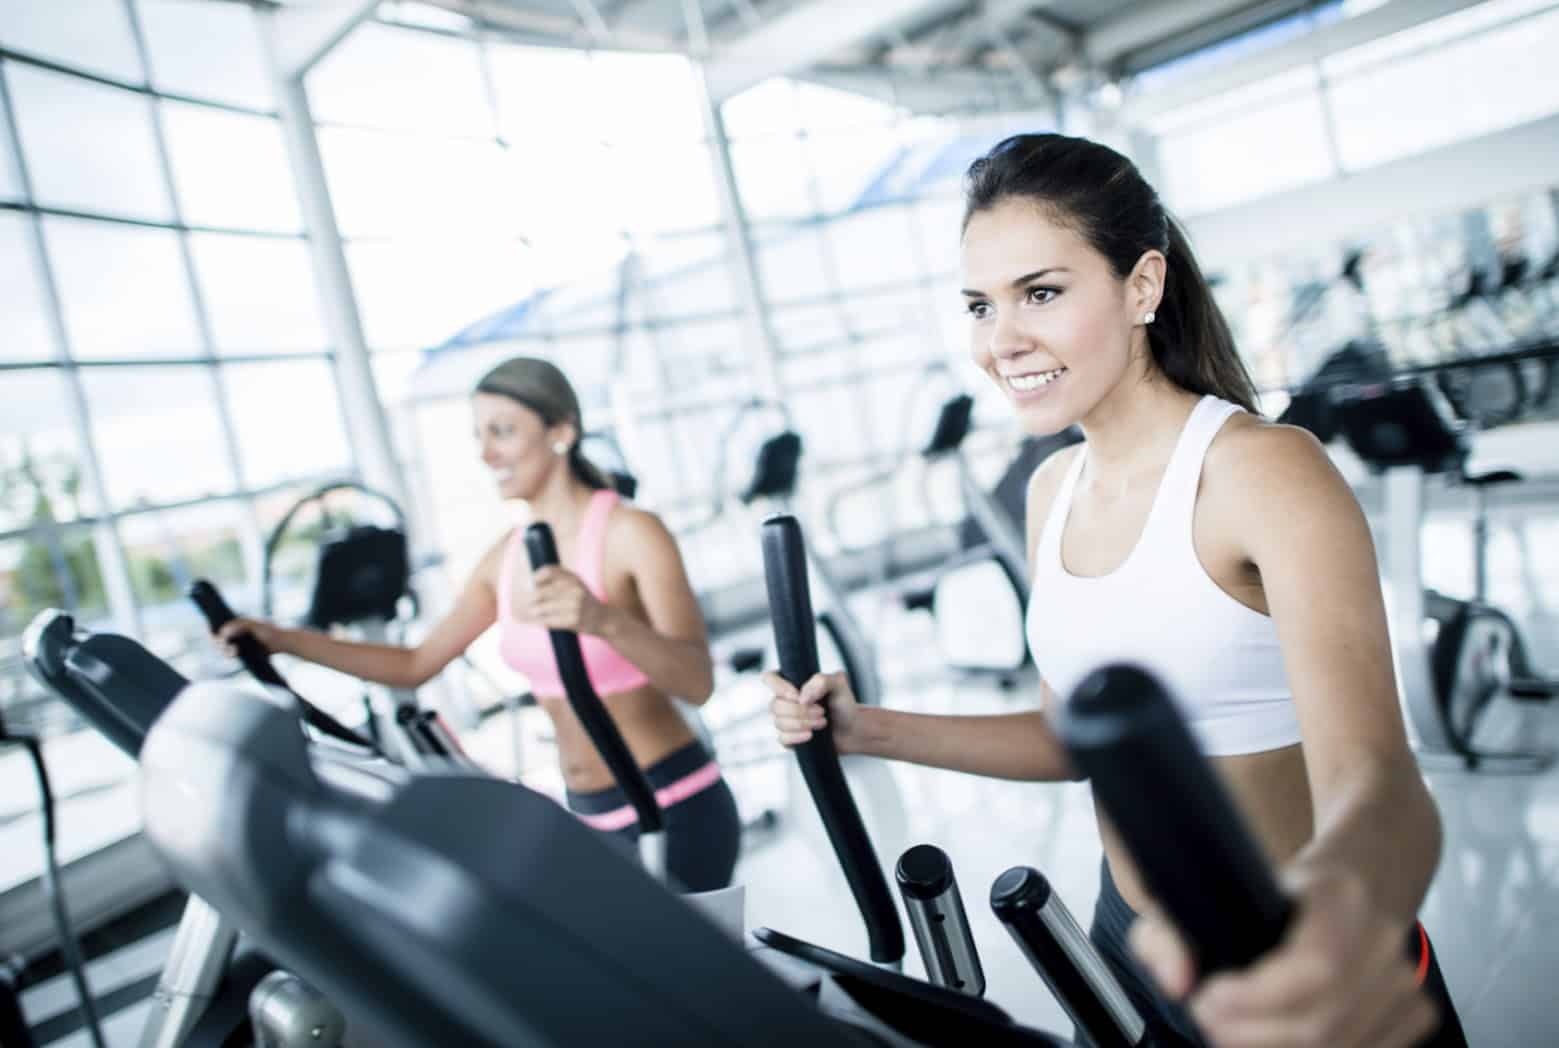 Women at the gym exercising on machines